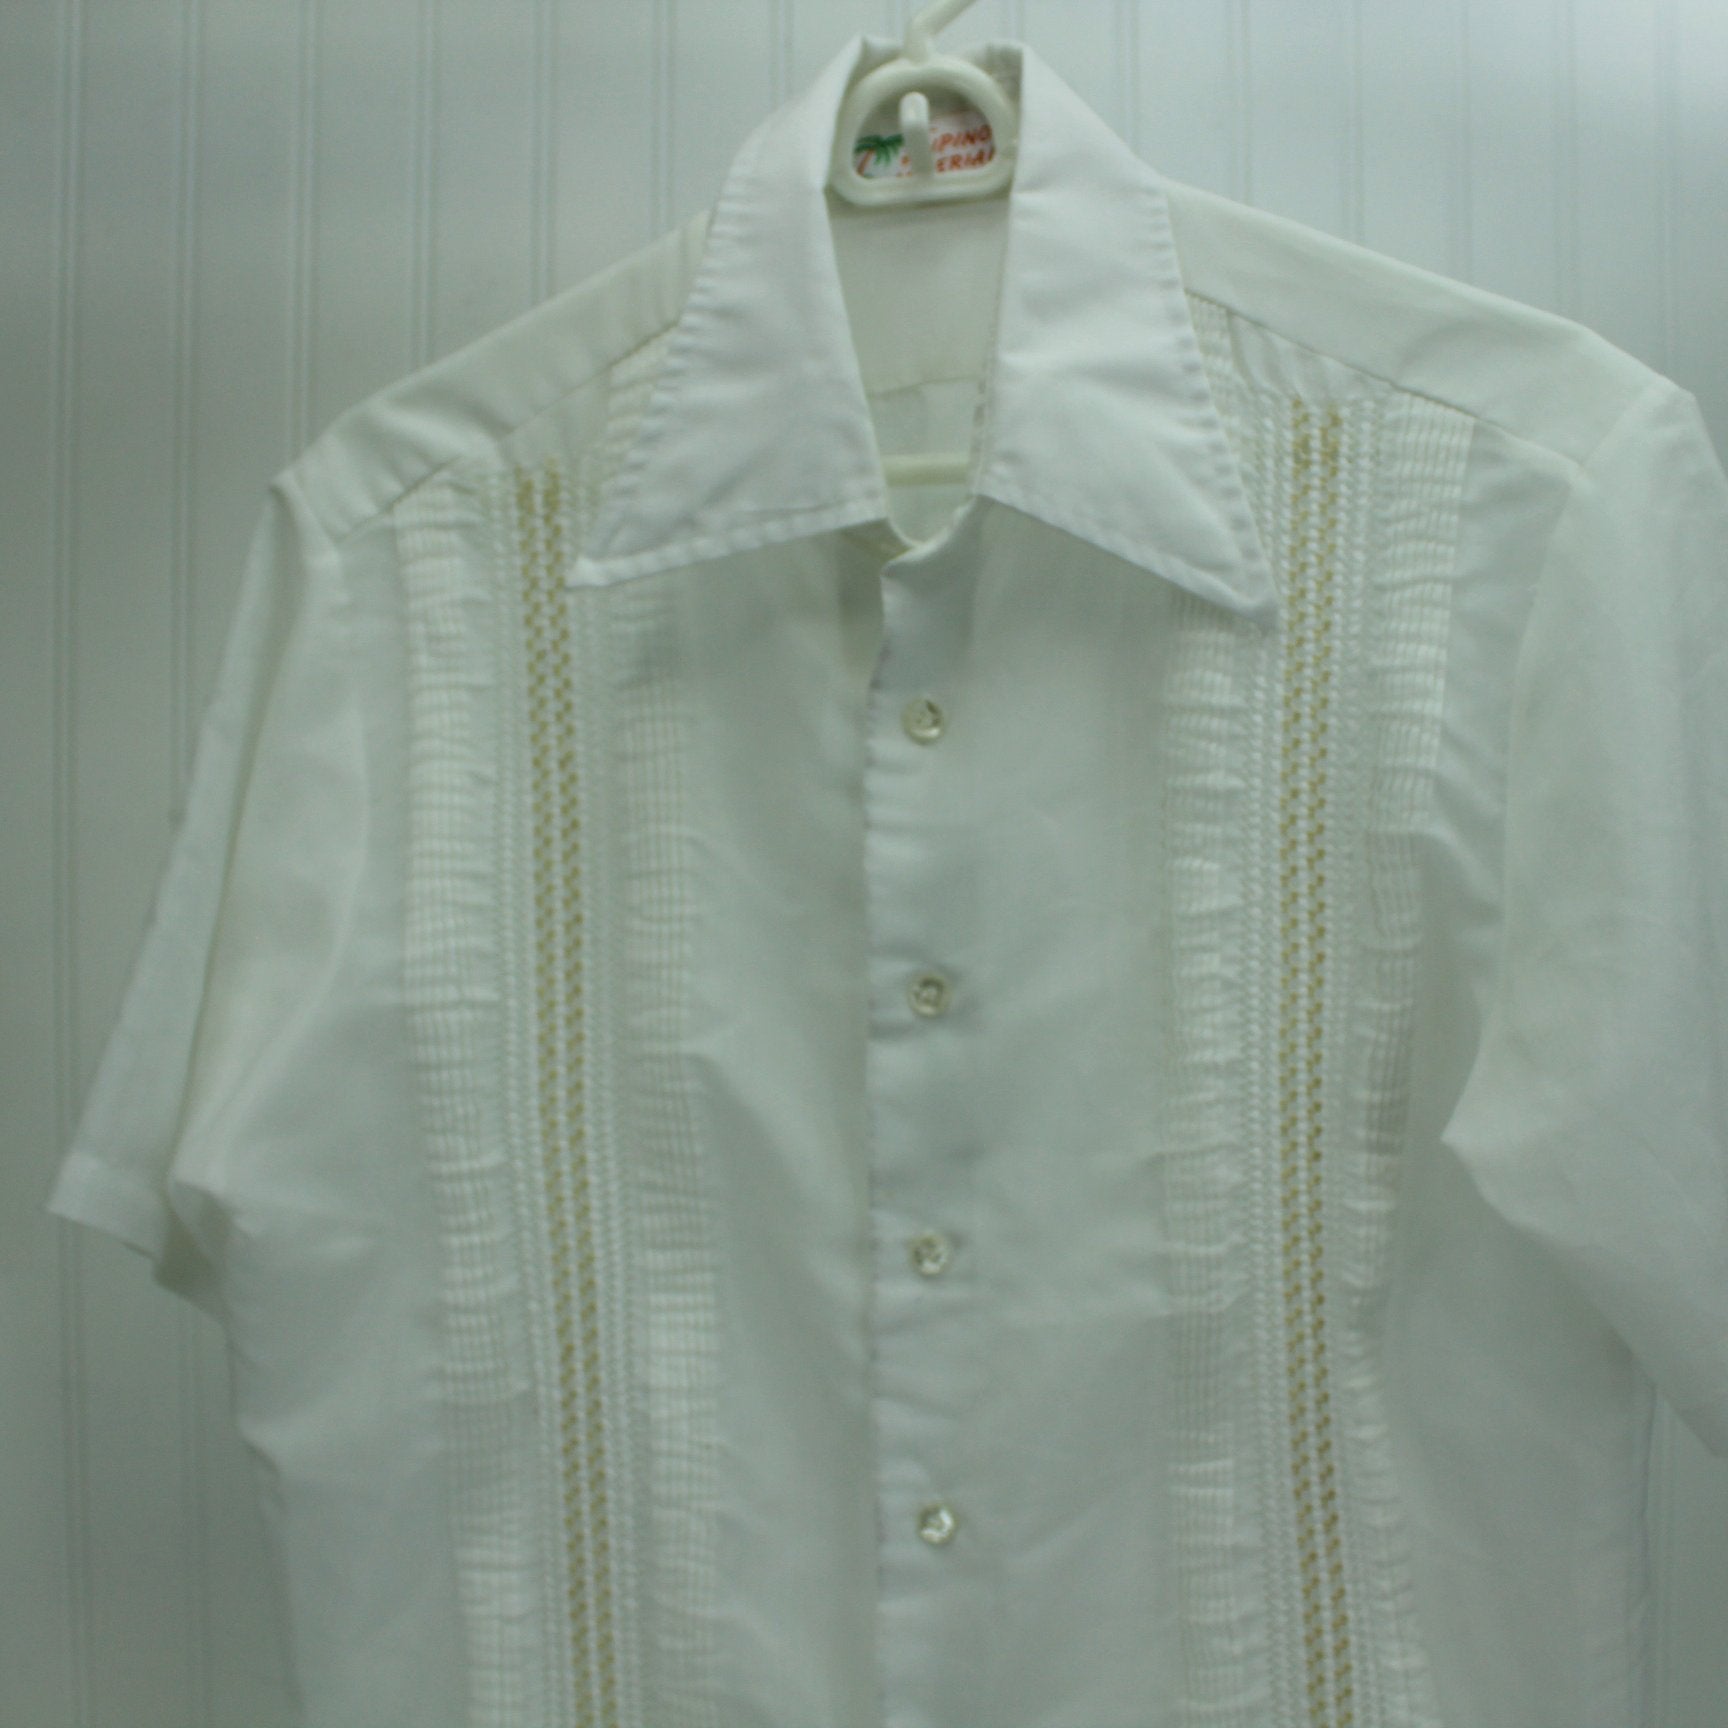 Collectible Mid Century Filipino Imperial Shirt Embroidered Lower Front Pockets  "M" front closeup